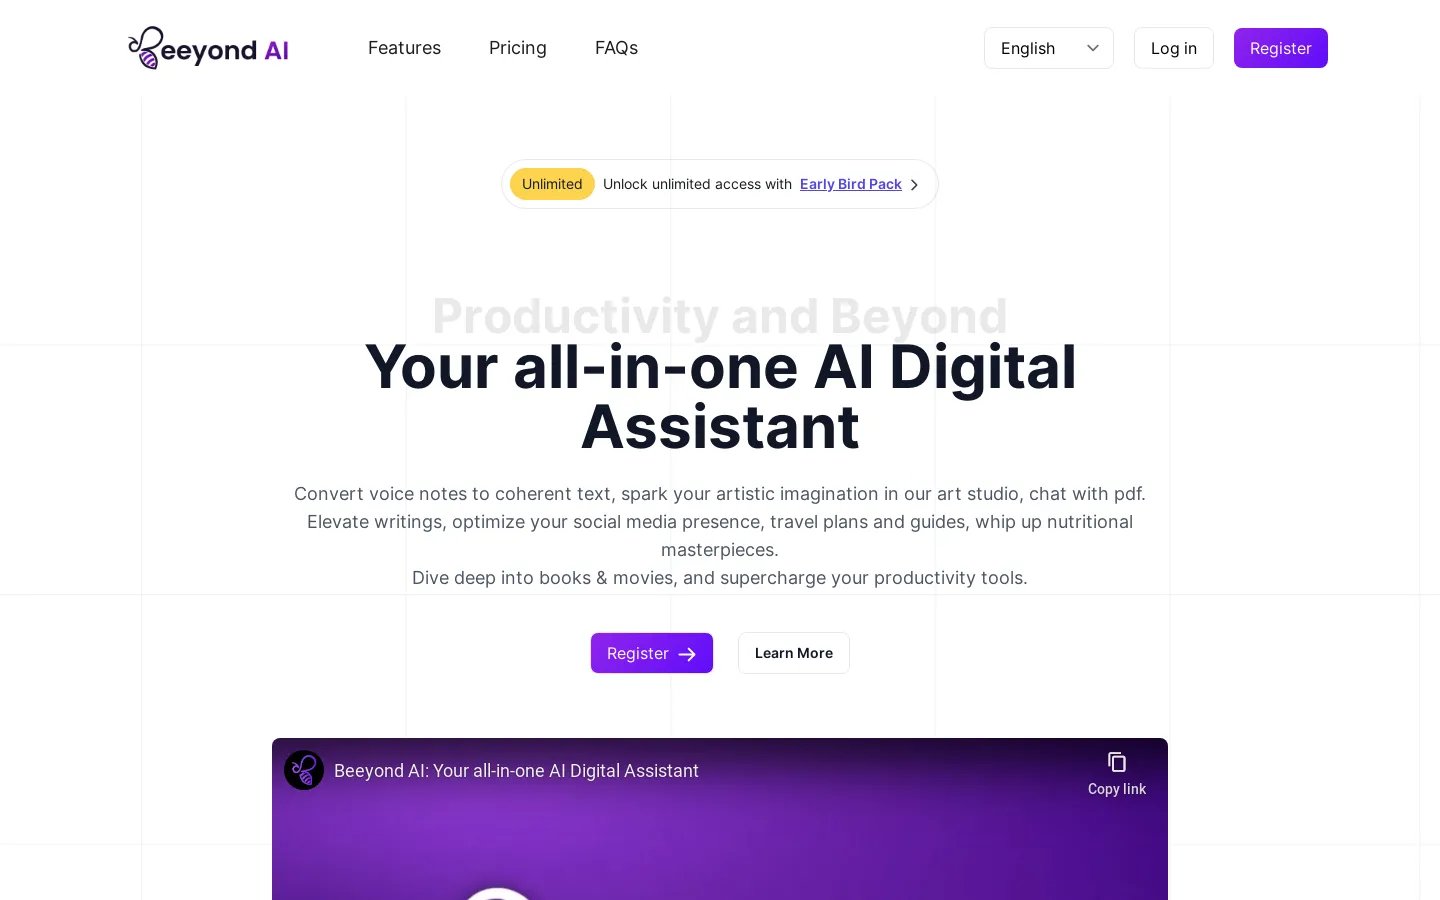 Beeyond AI - Your All-In-One AI Digital Assistant